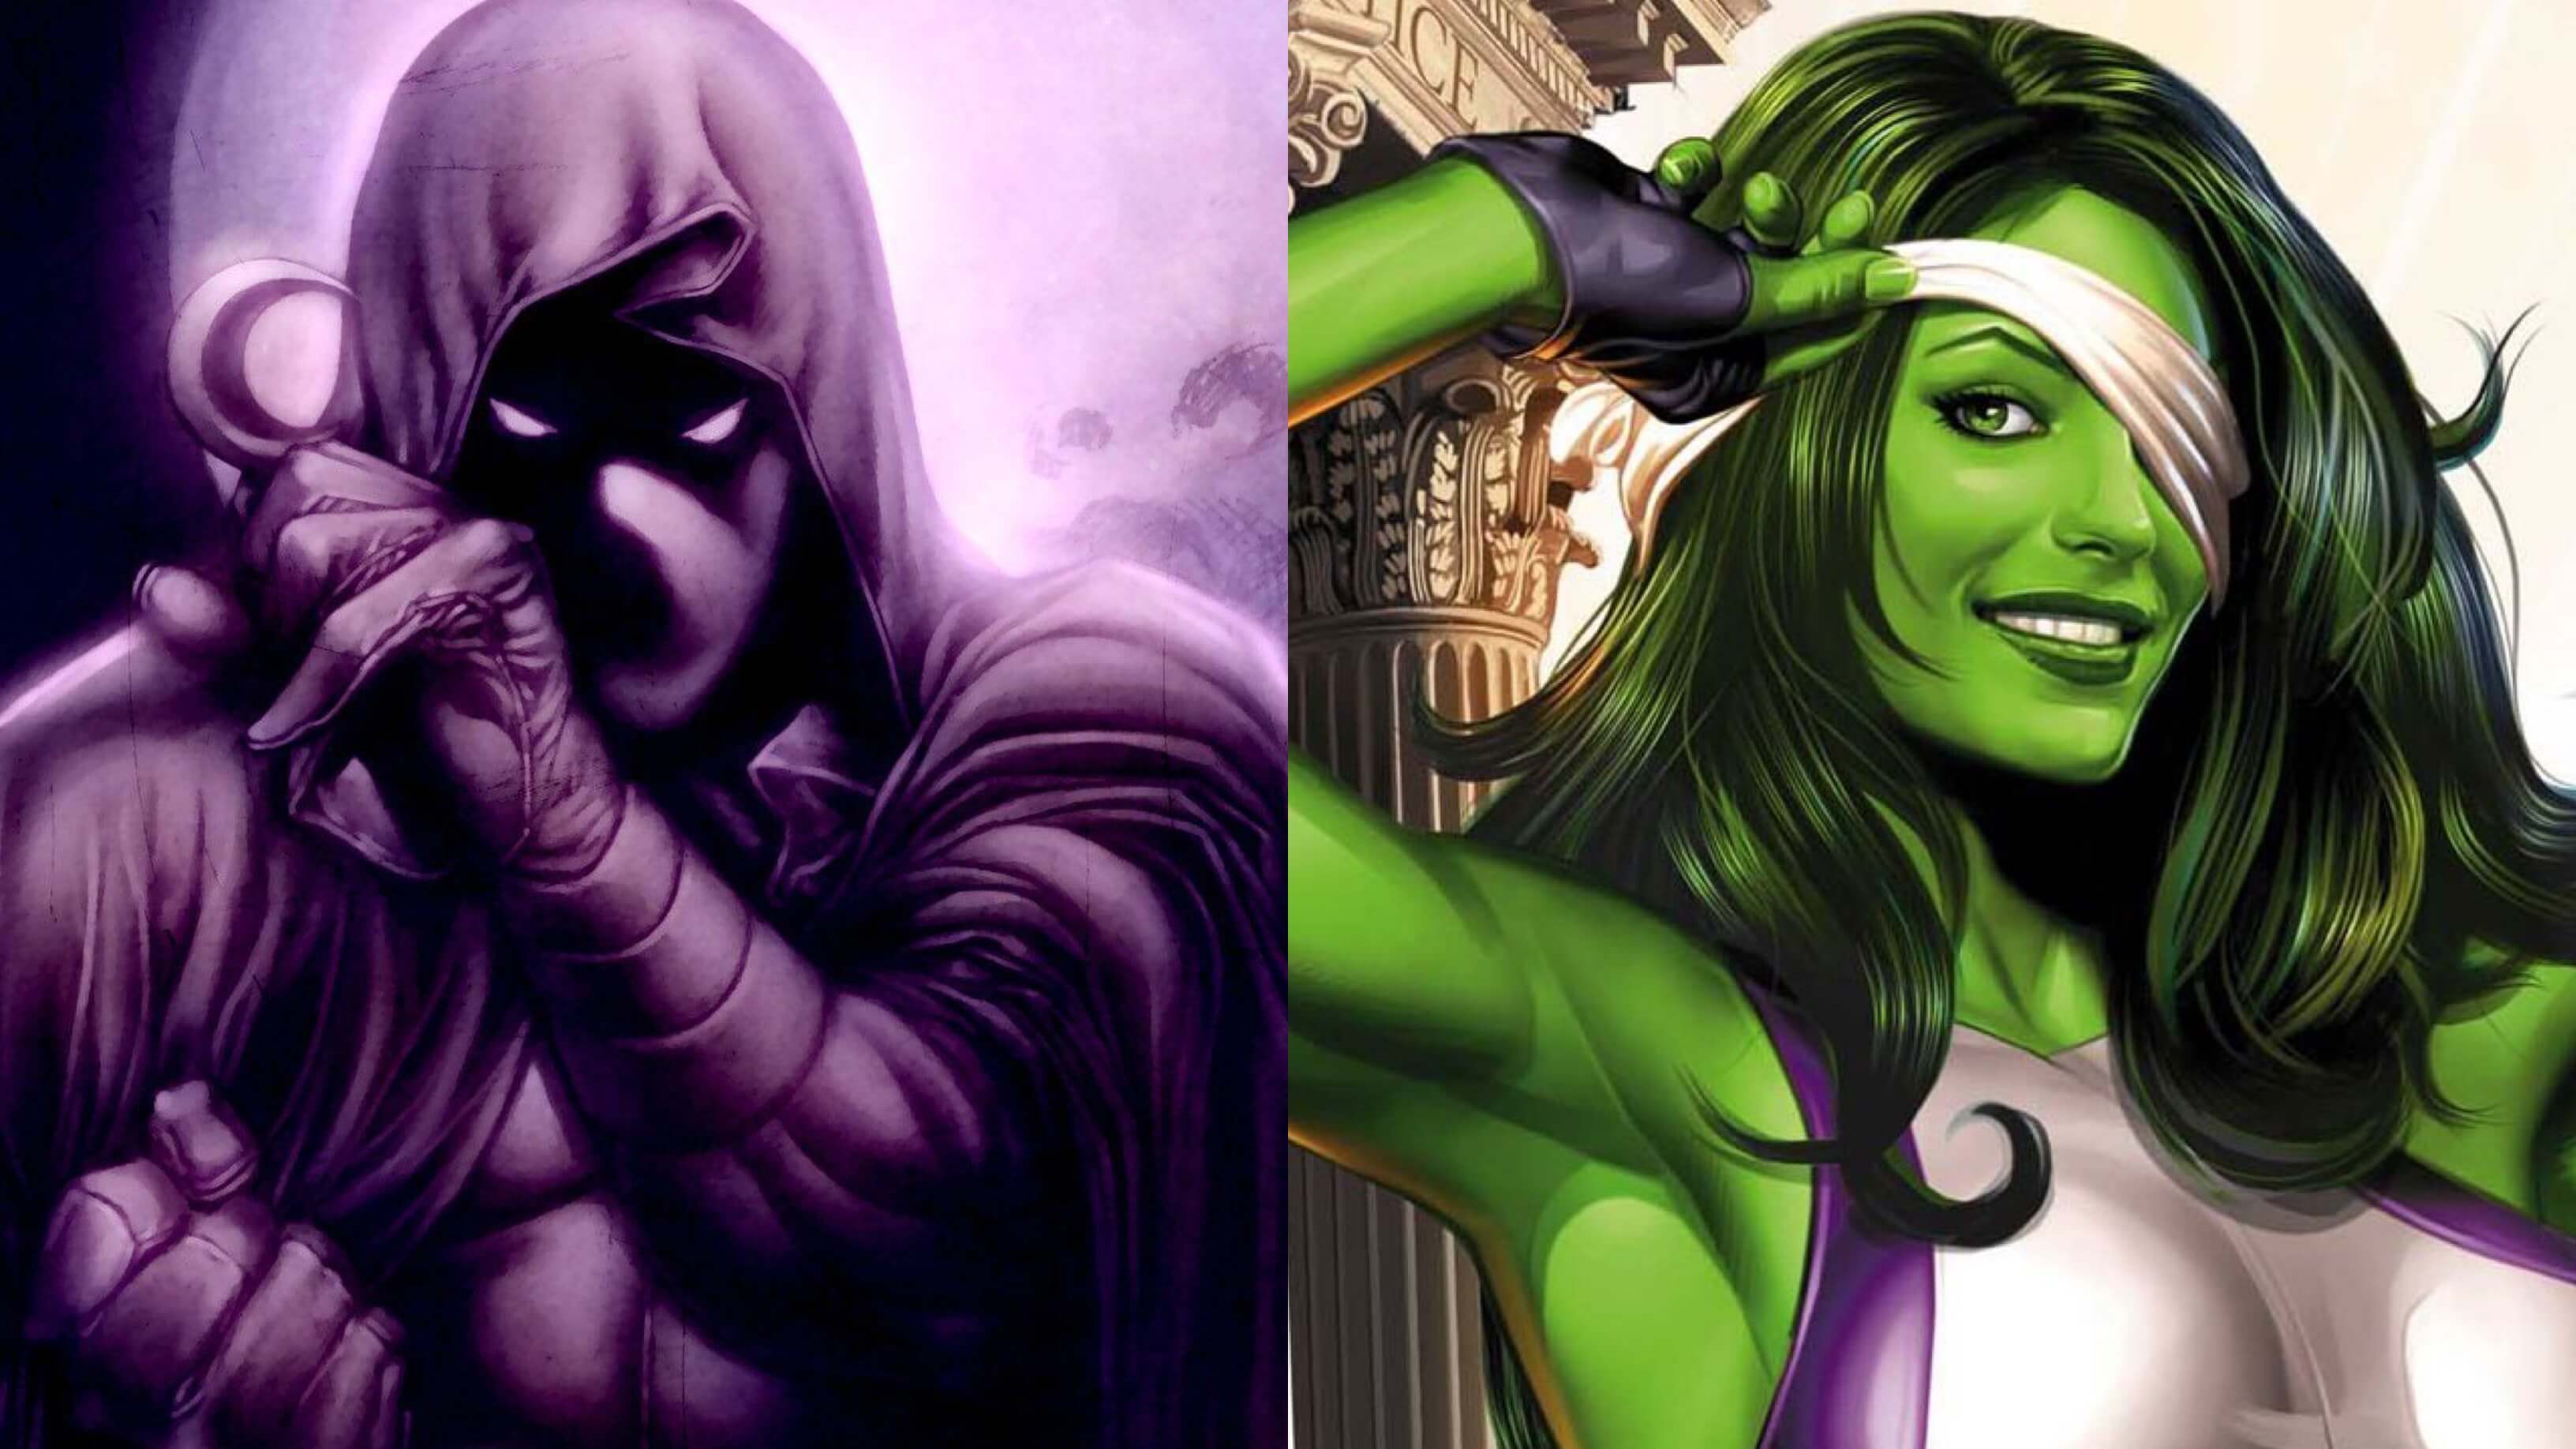 Moon Knight and She-Hulk Will Appear On The Big Screen Following Their Disney+ Series